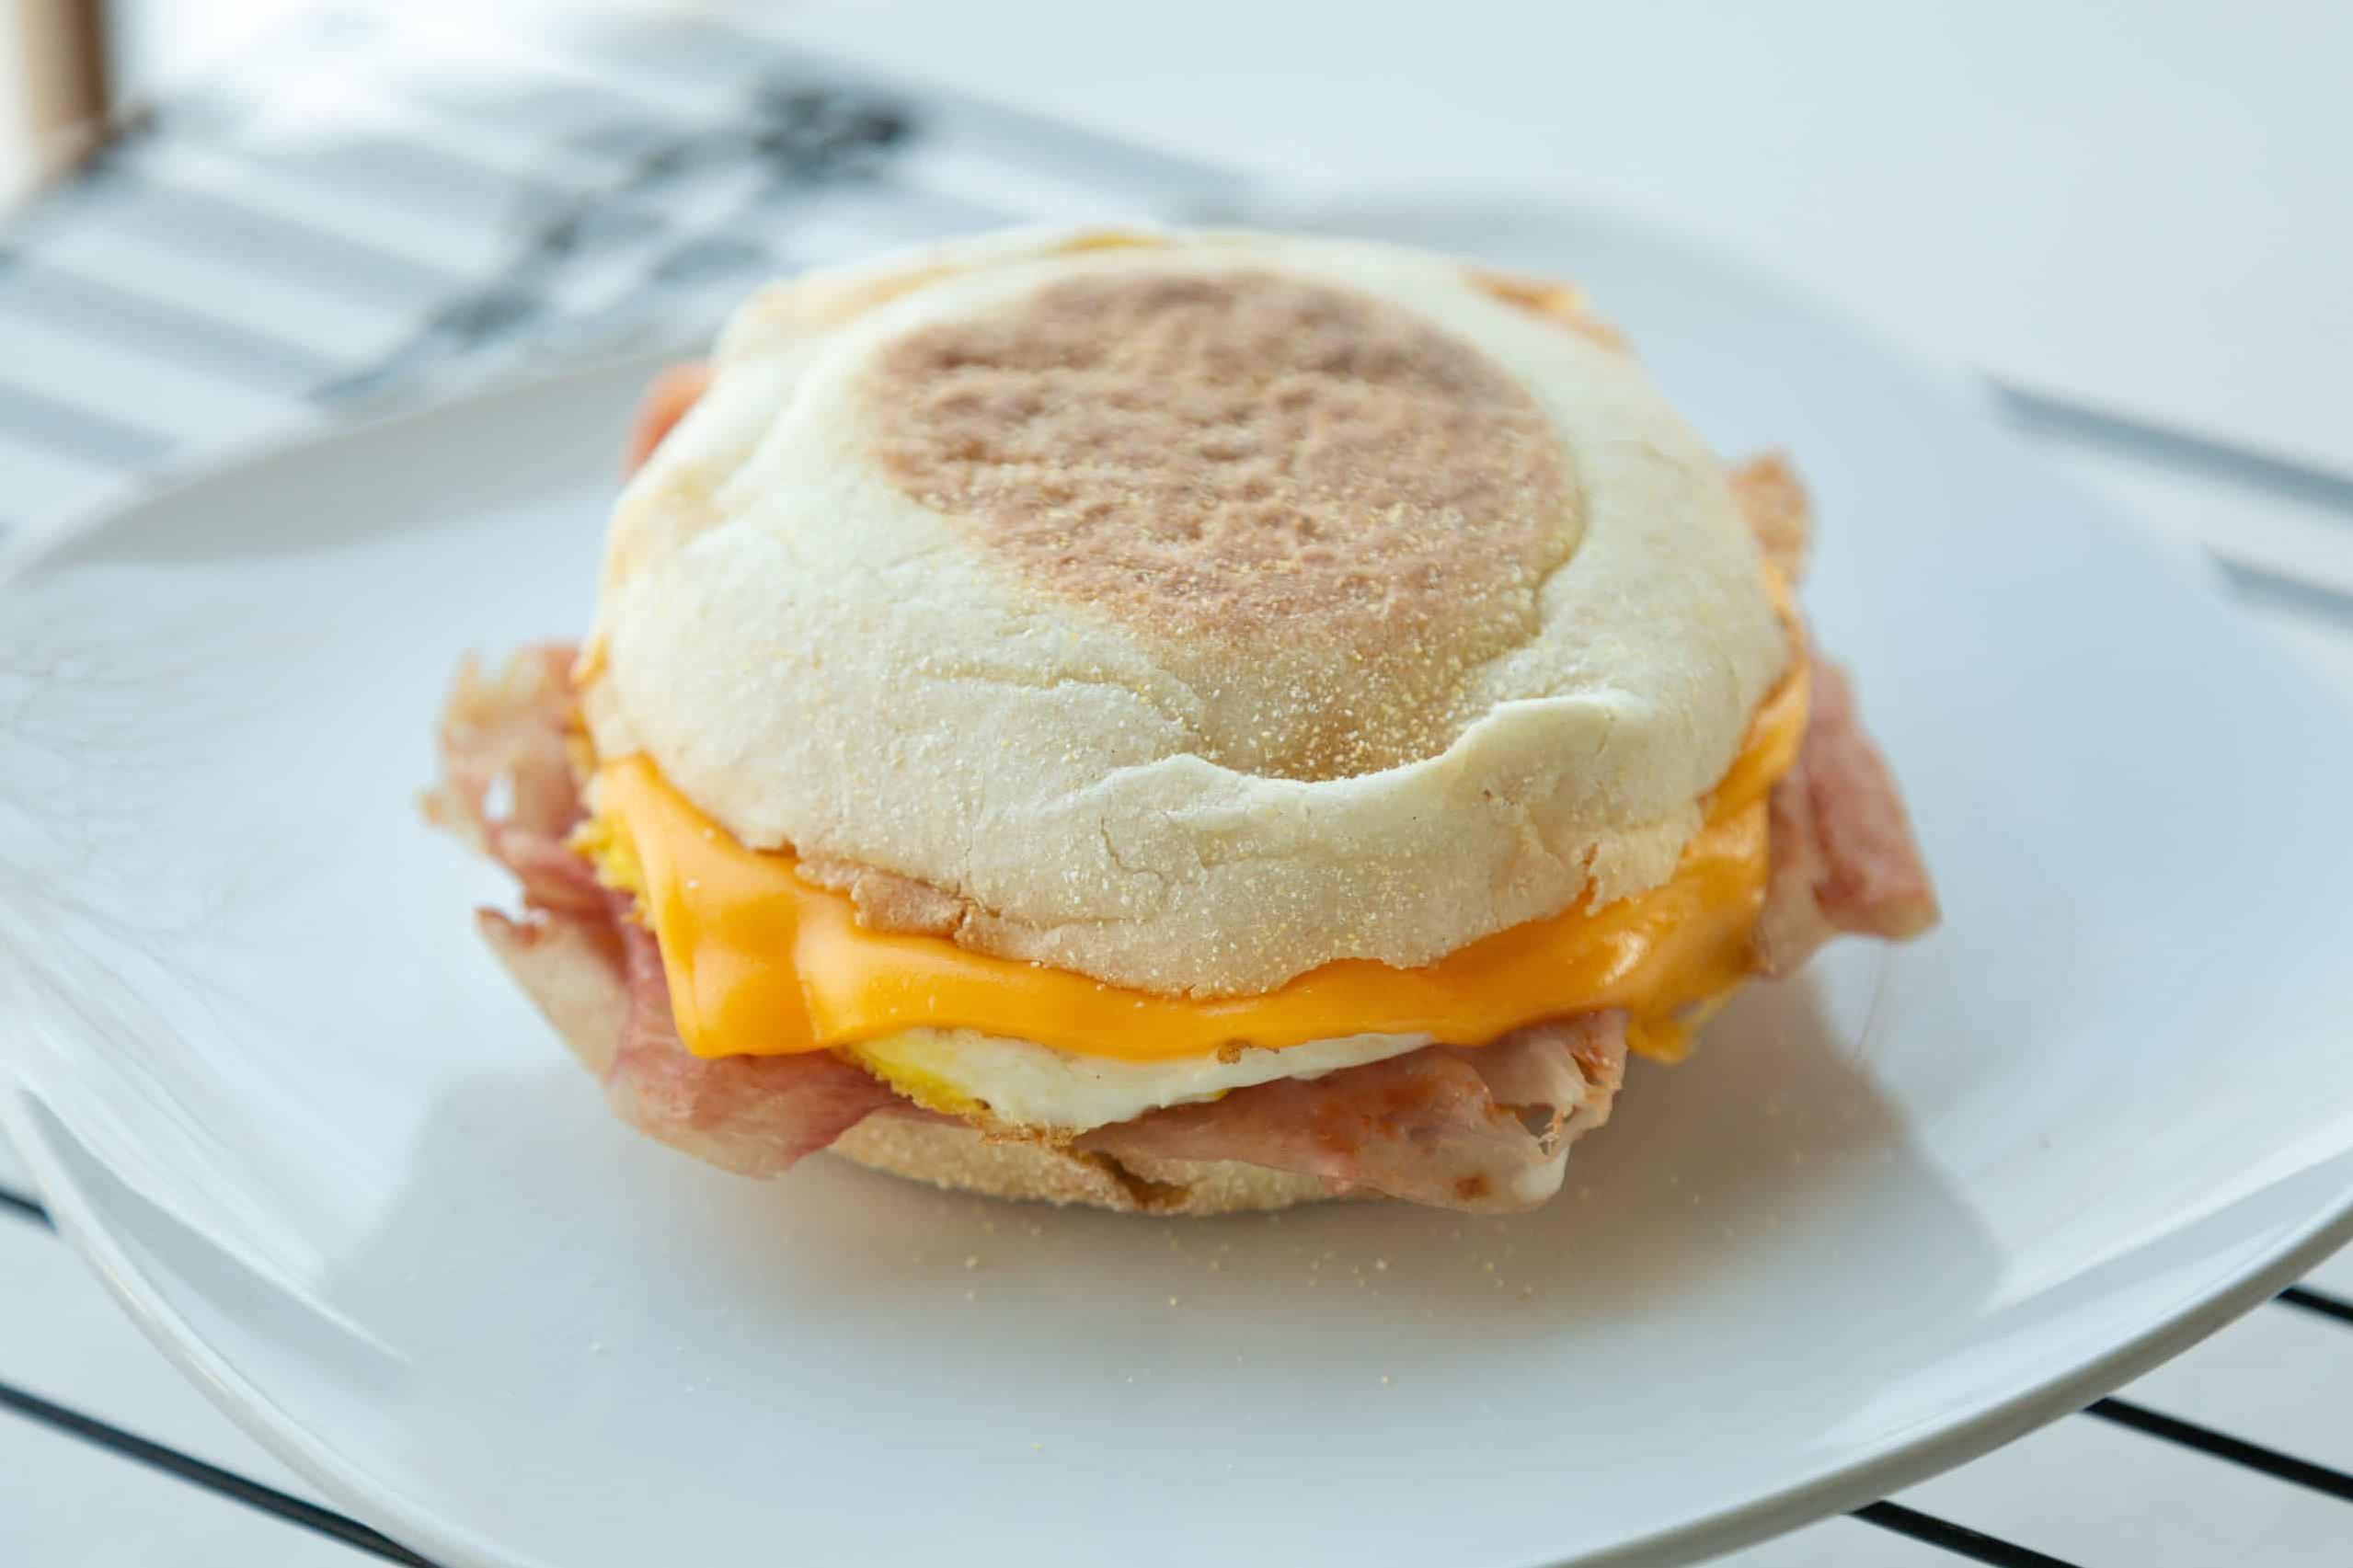  The salty ham adds the perfect touch to this savory breakfast sandwich.